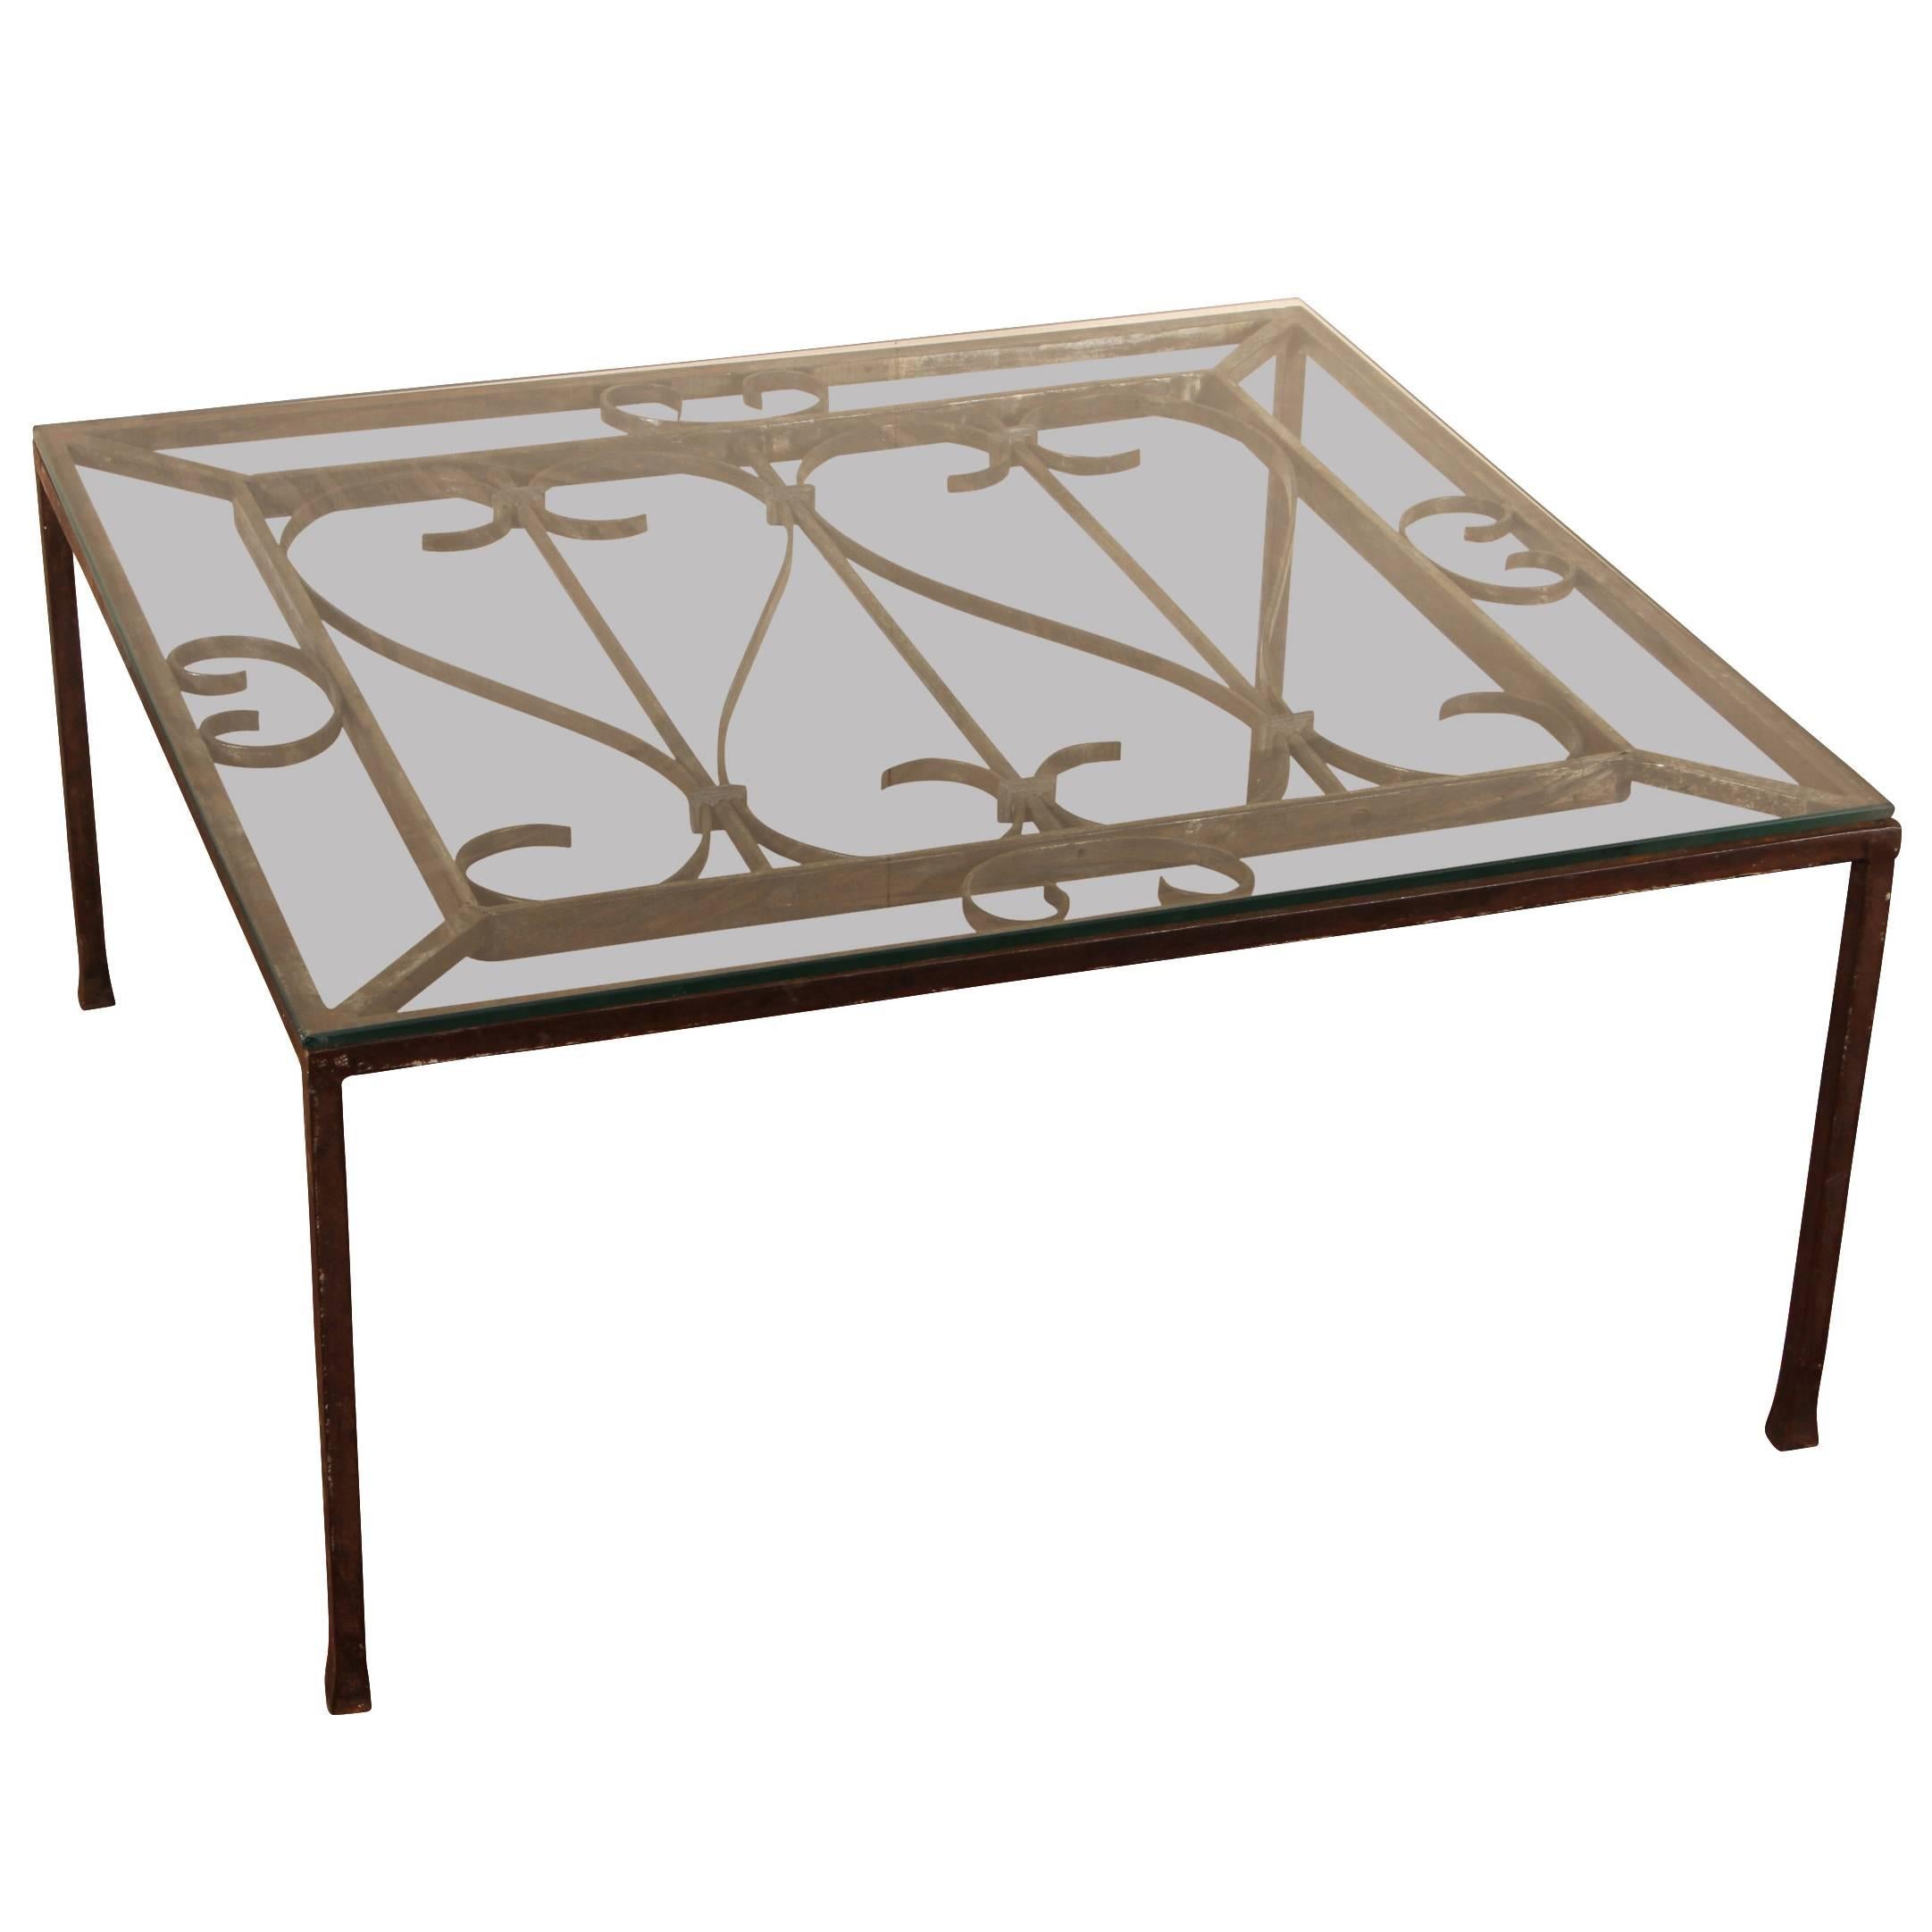 Antique Iron Architectural Element Mounted as Cocktail Table